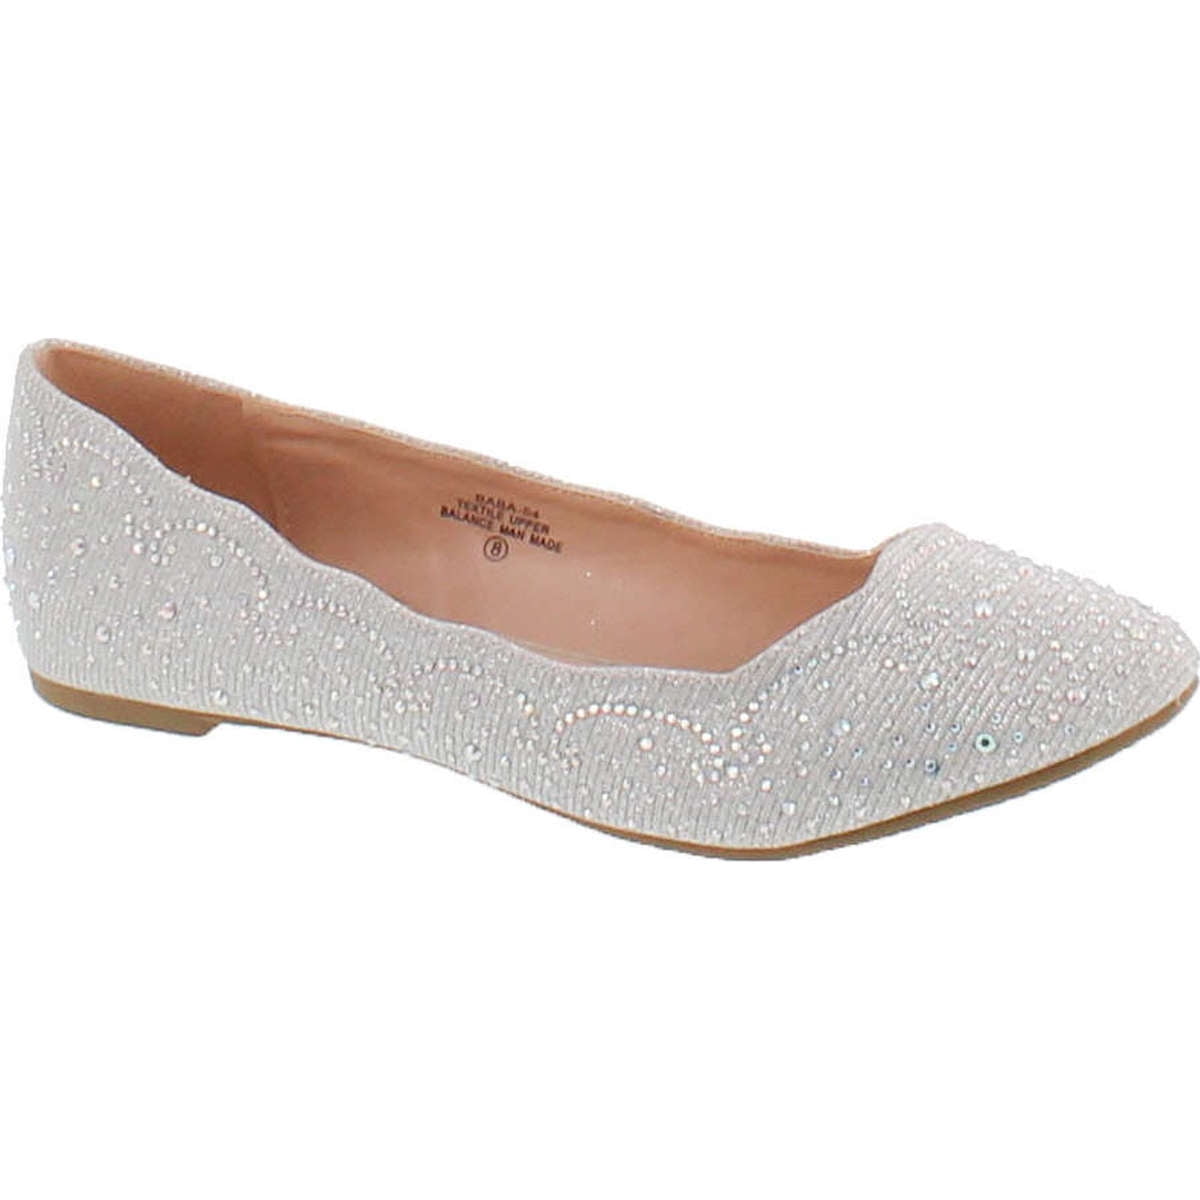 sparkly flats